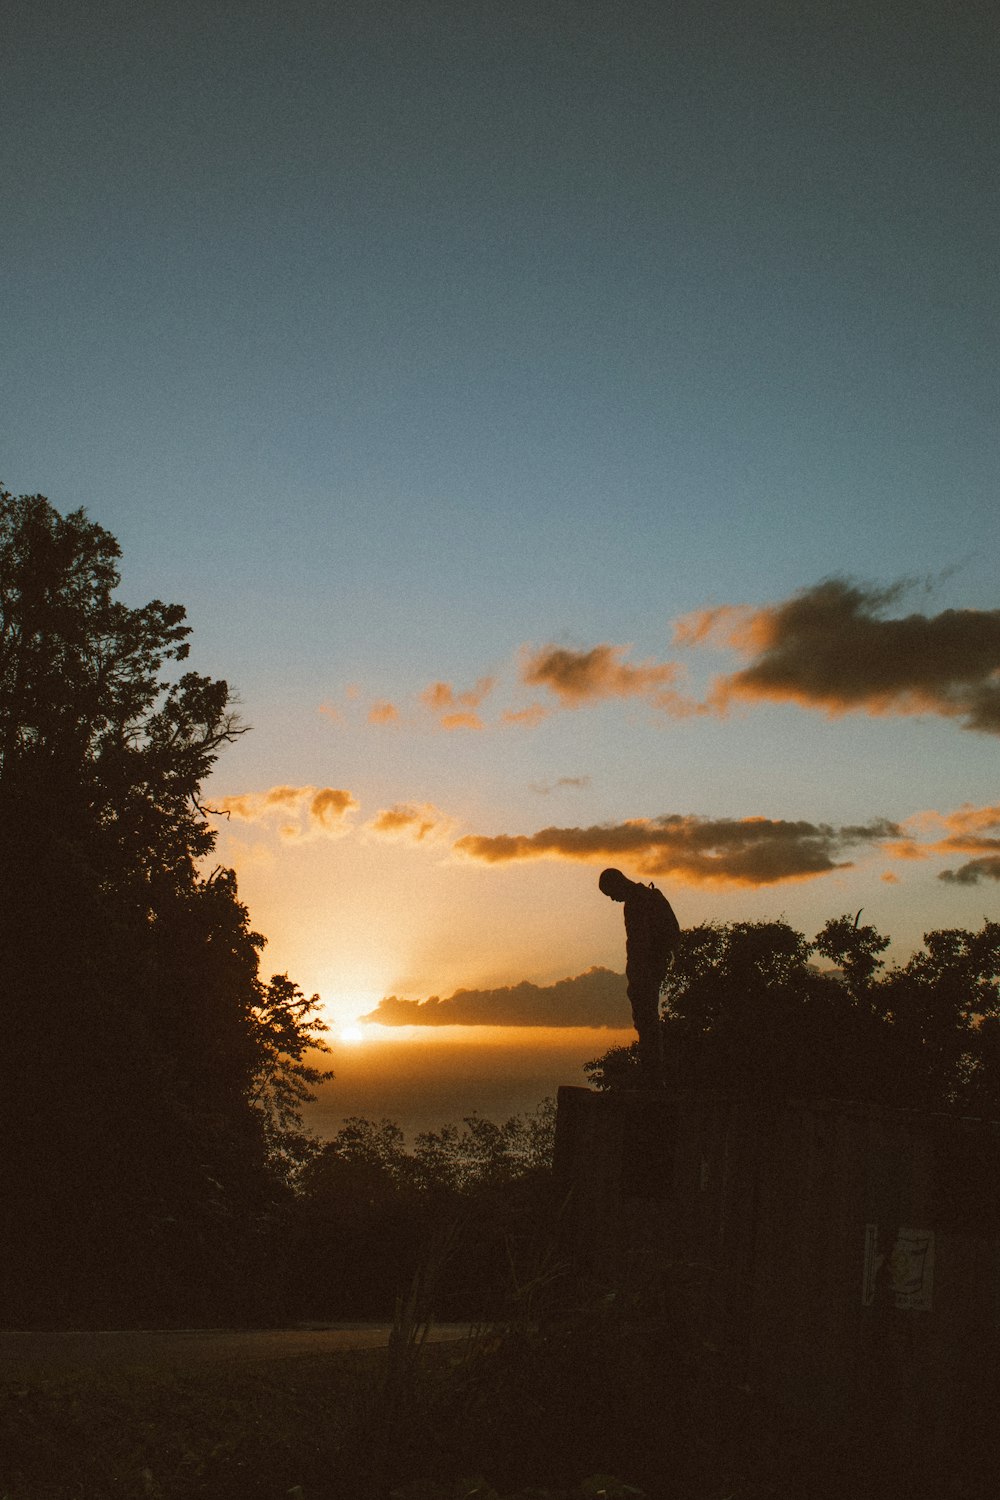 silhouette of man standing on top of building during sunset